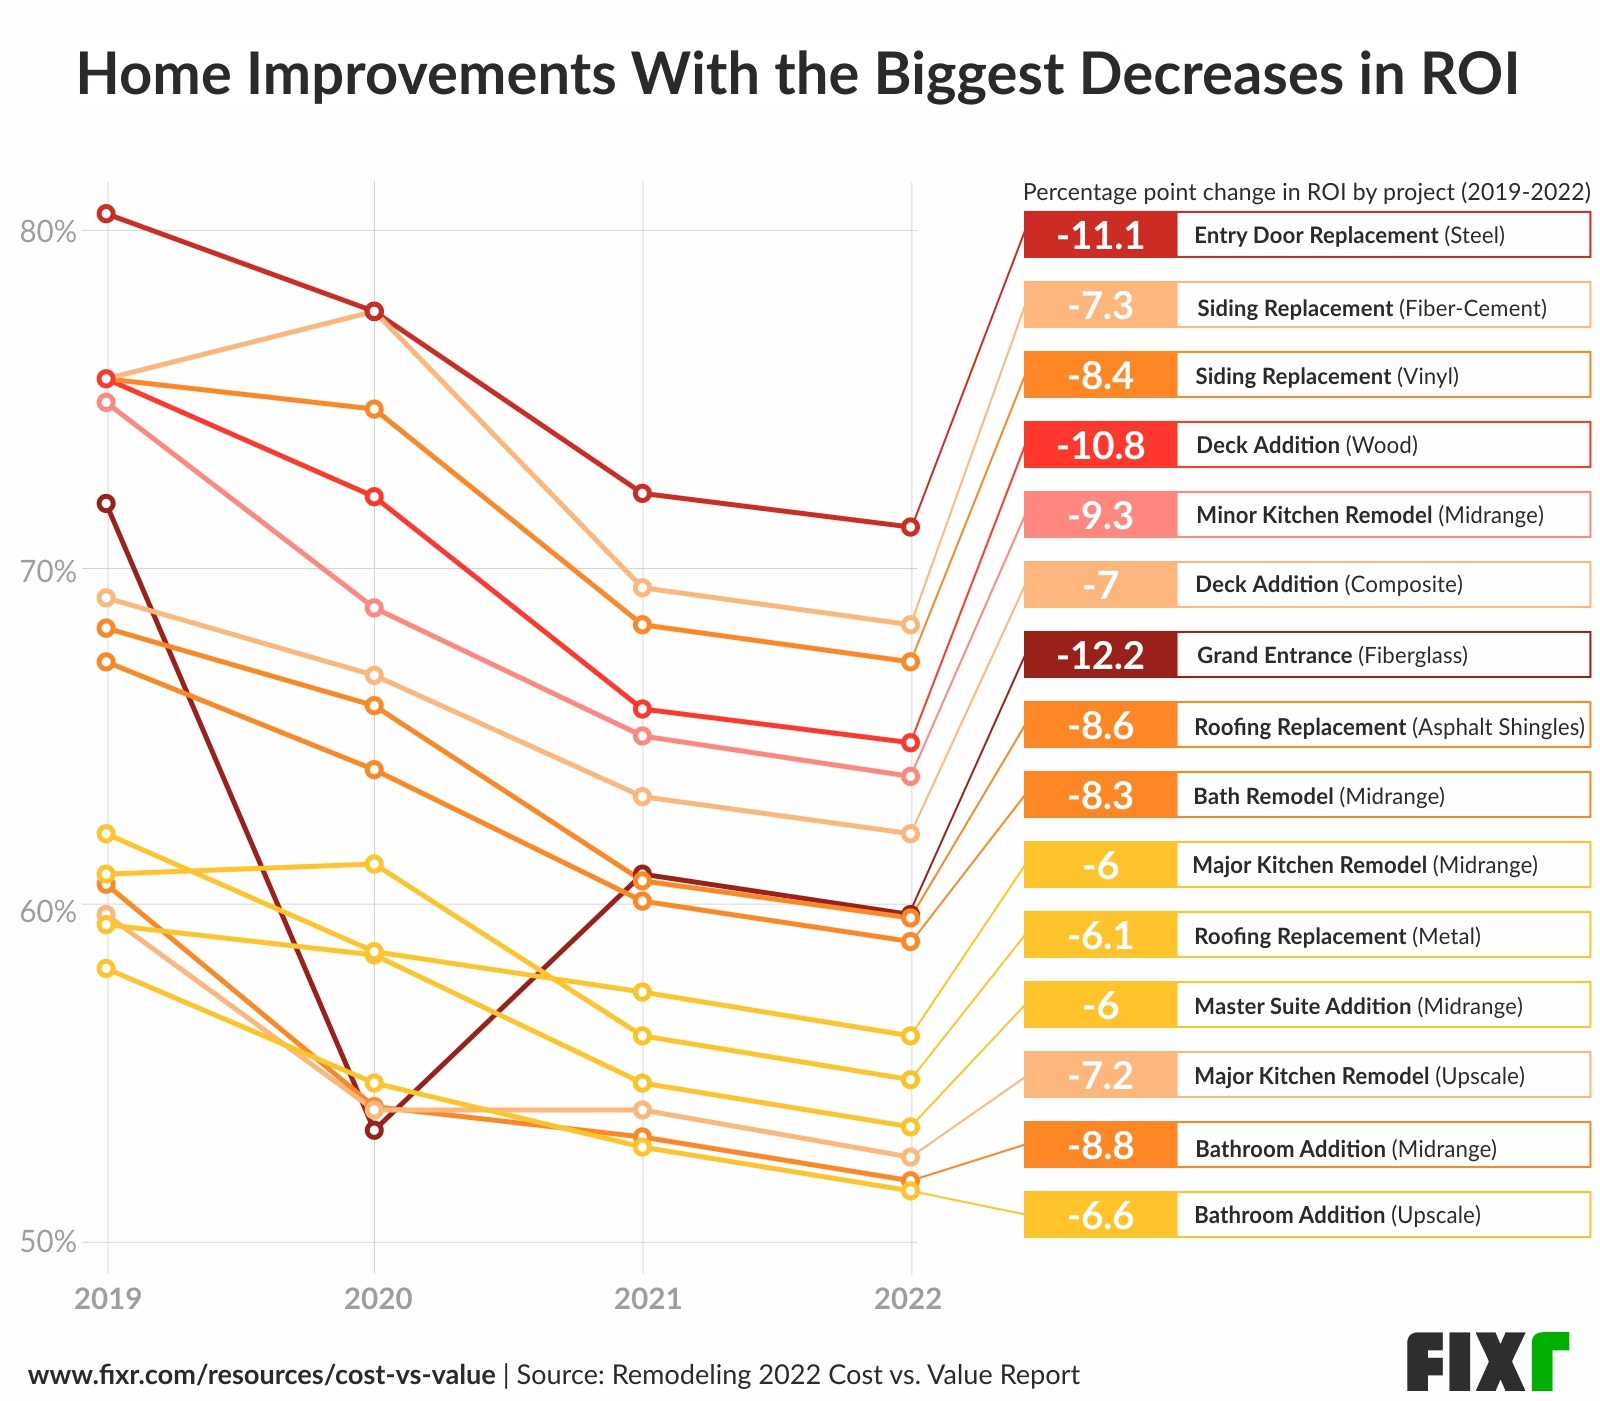 Top 15 projects that experienced the largest percent decrease in ROI